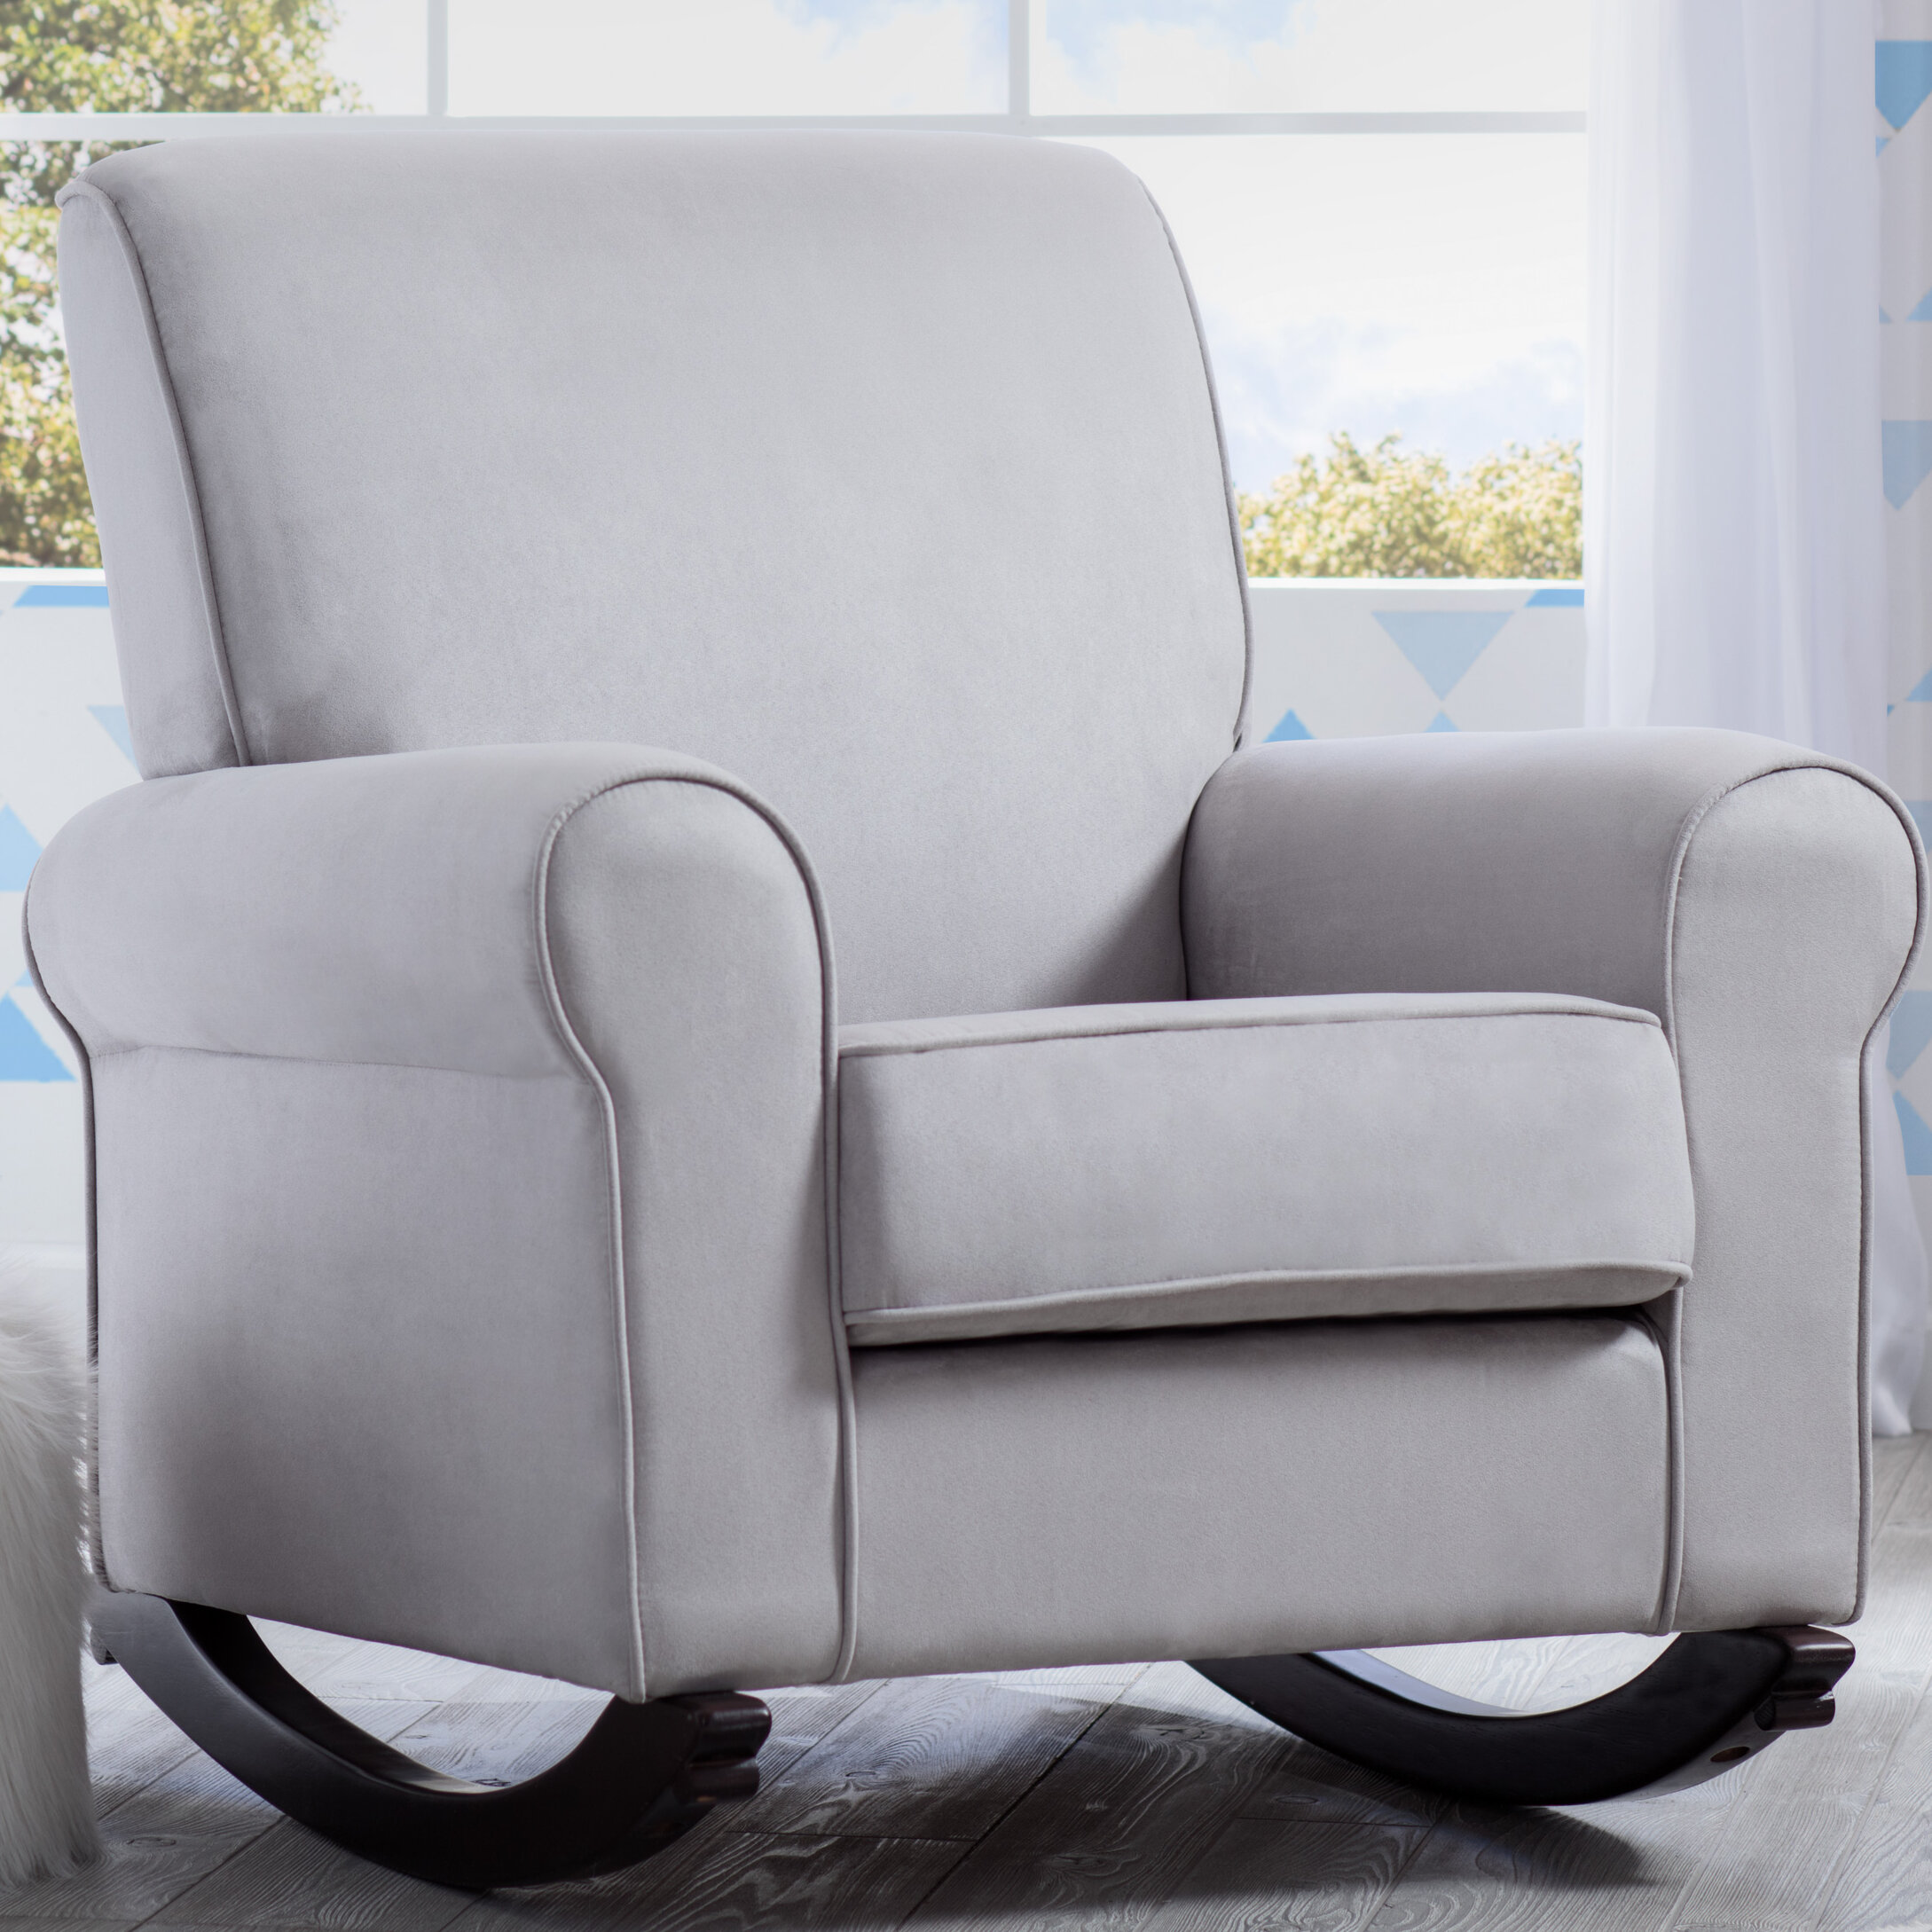 Leather Rocking Chair Nursery - This rocking chair comes pretty close